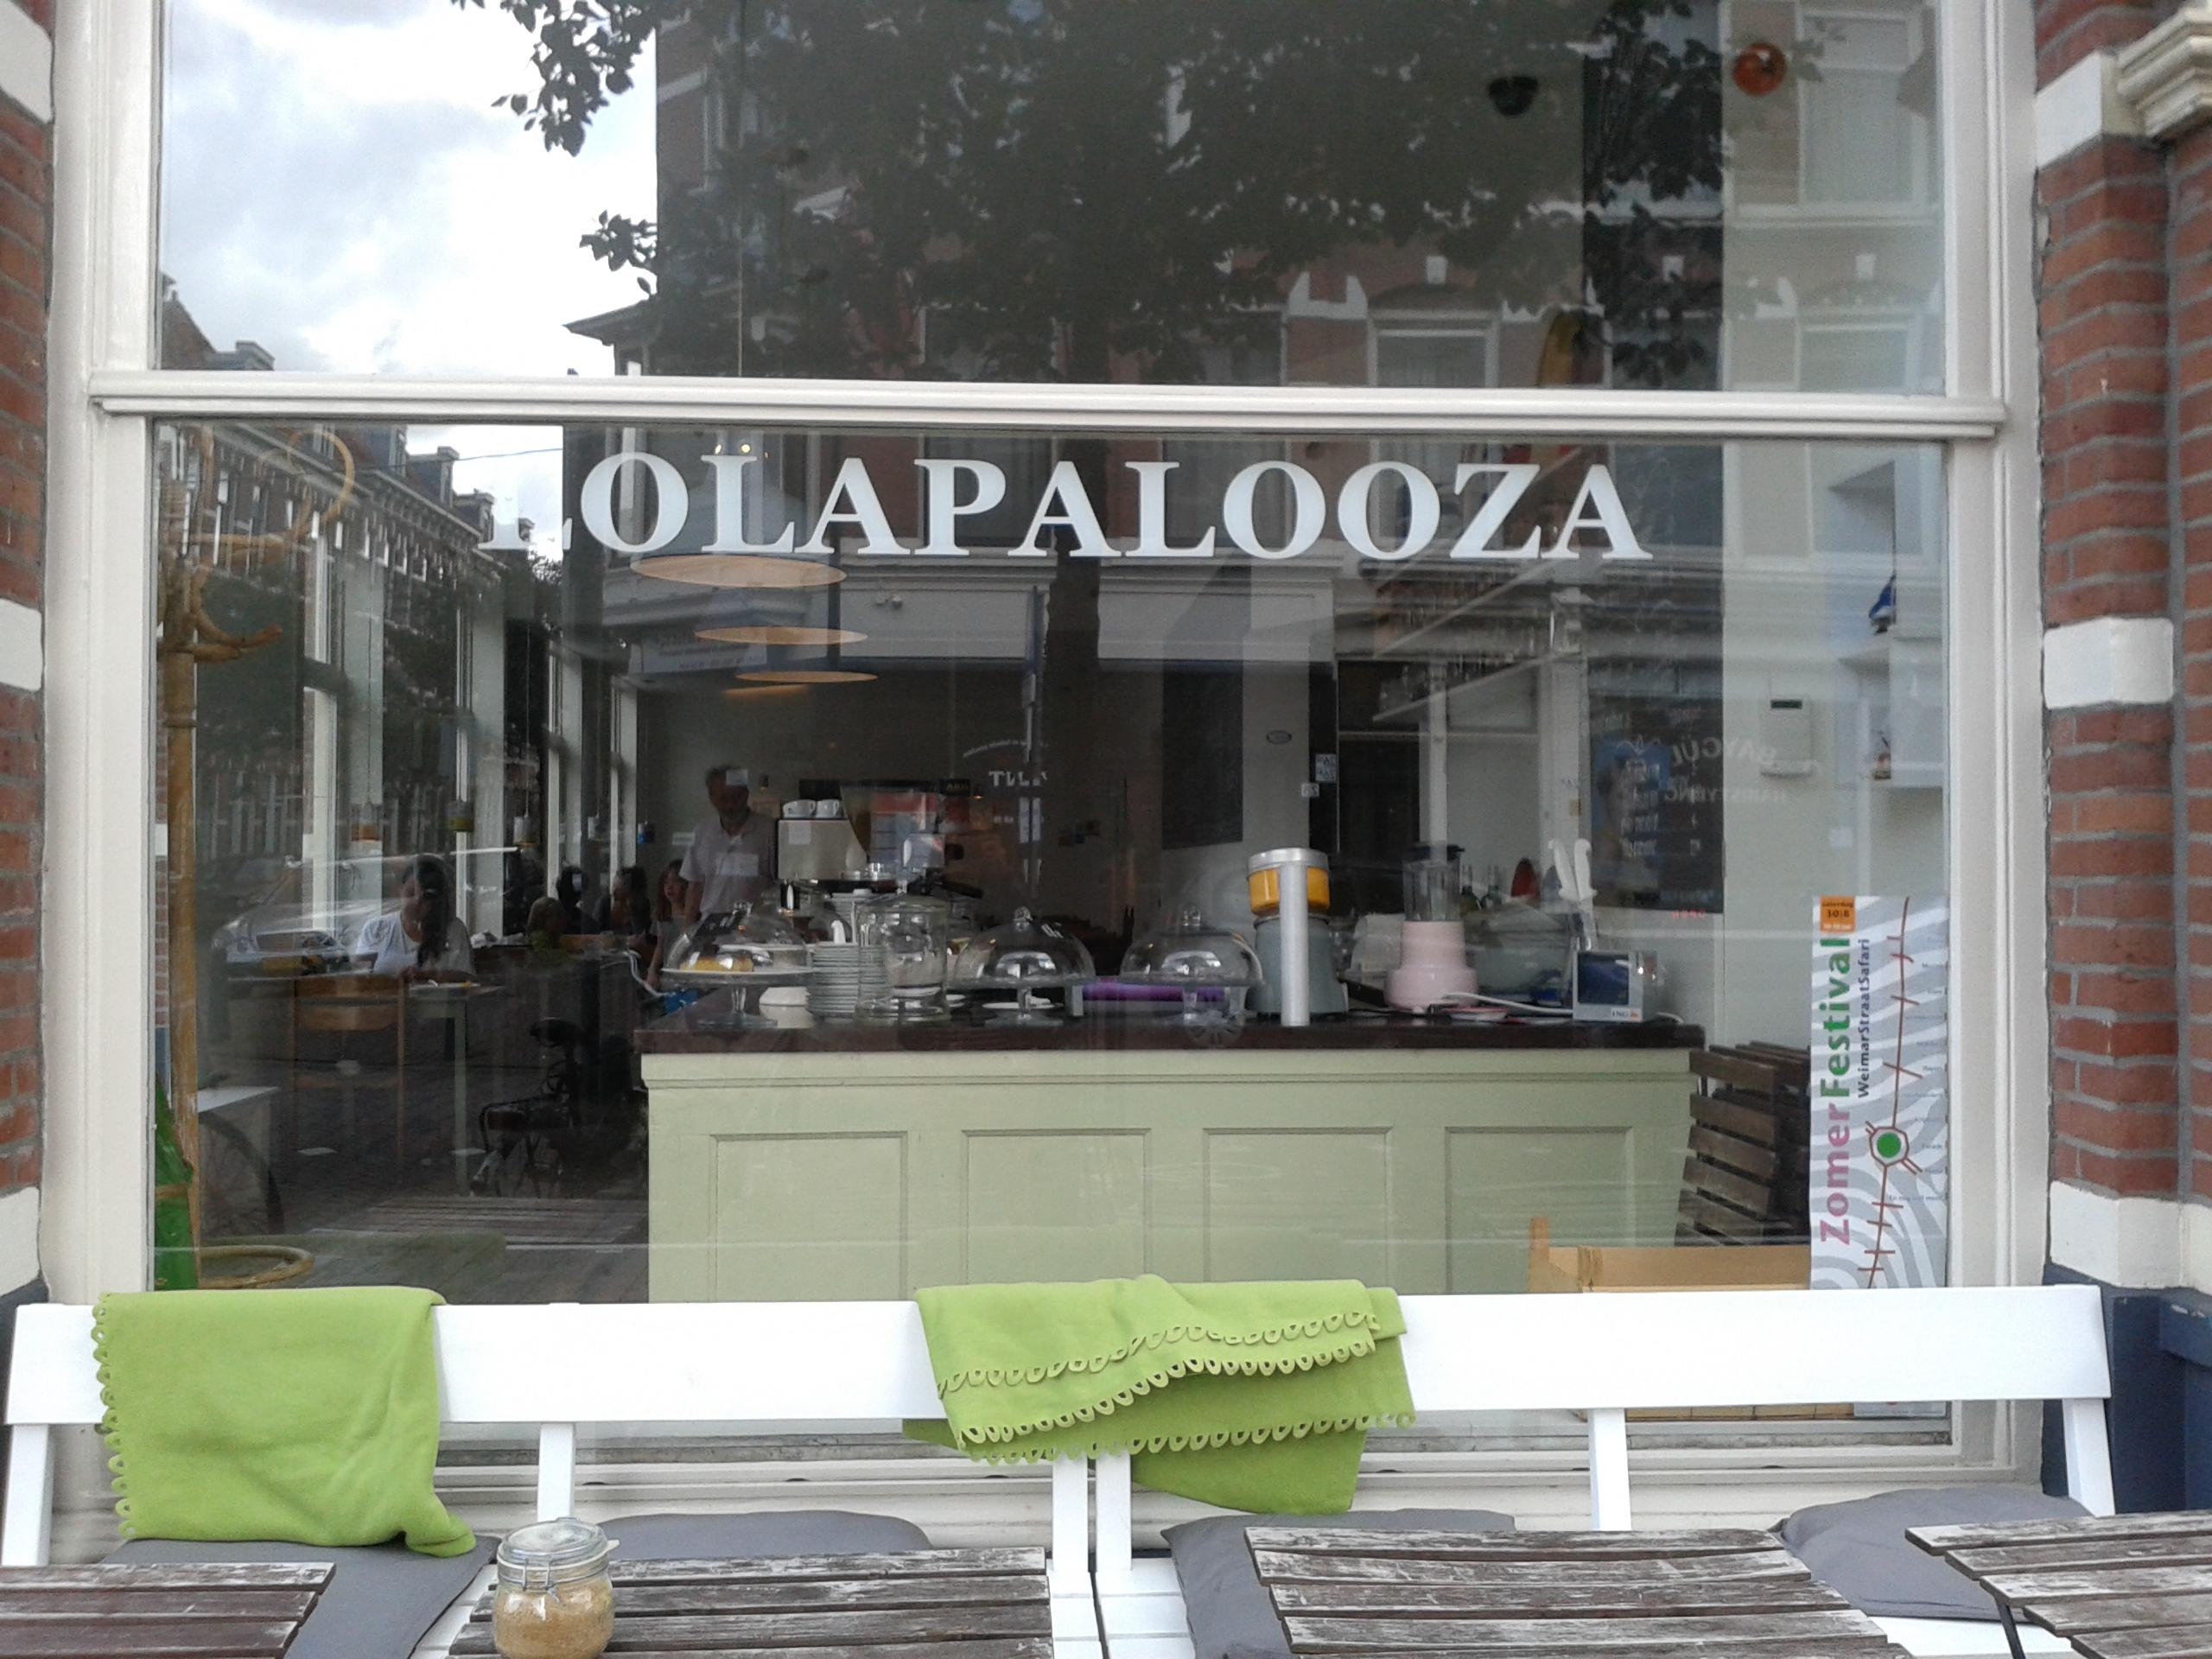 Cover image of this place Lolapalooza